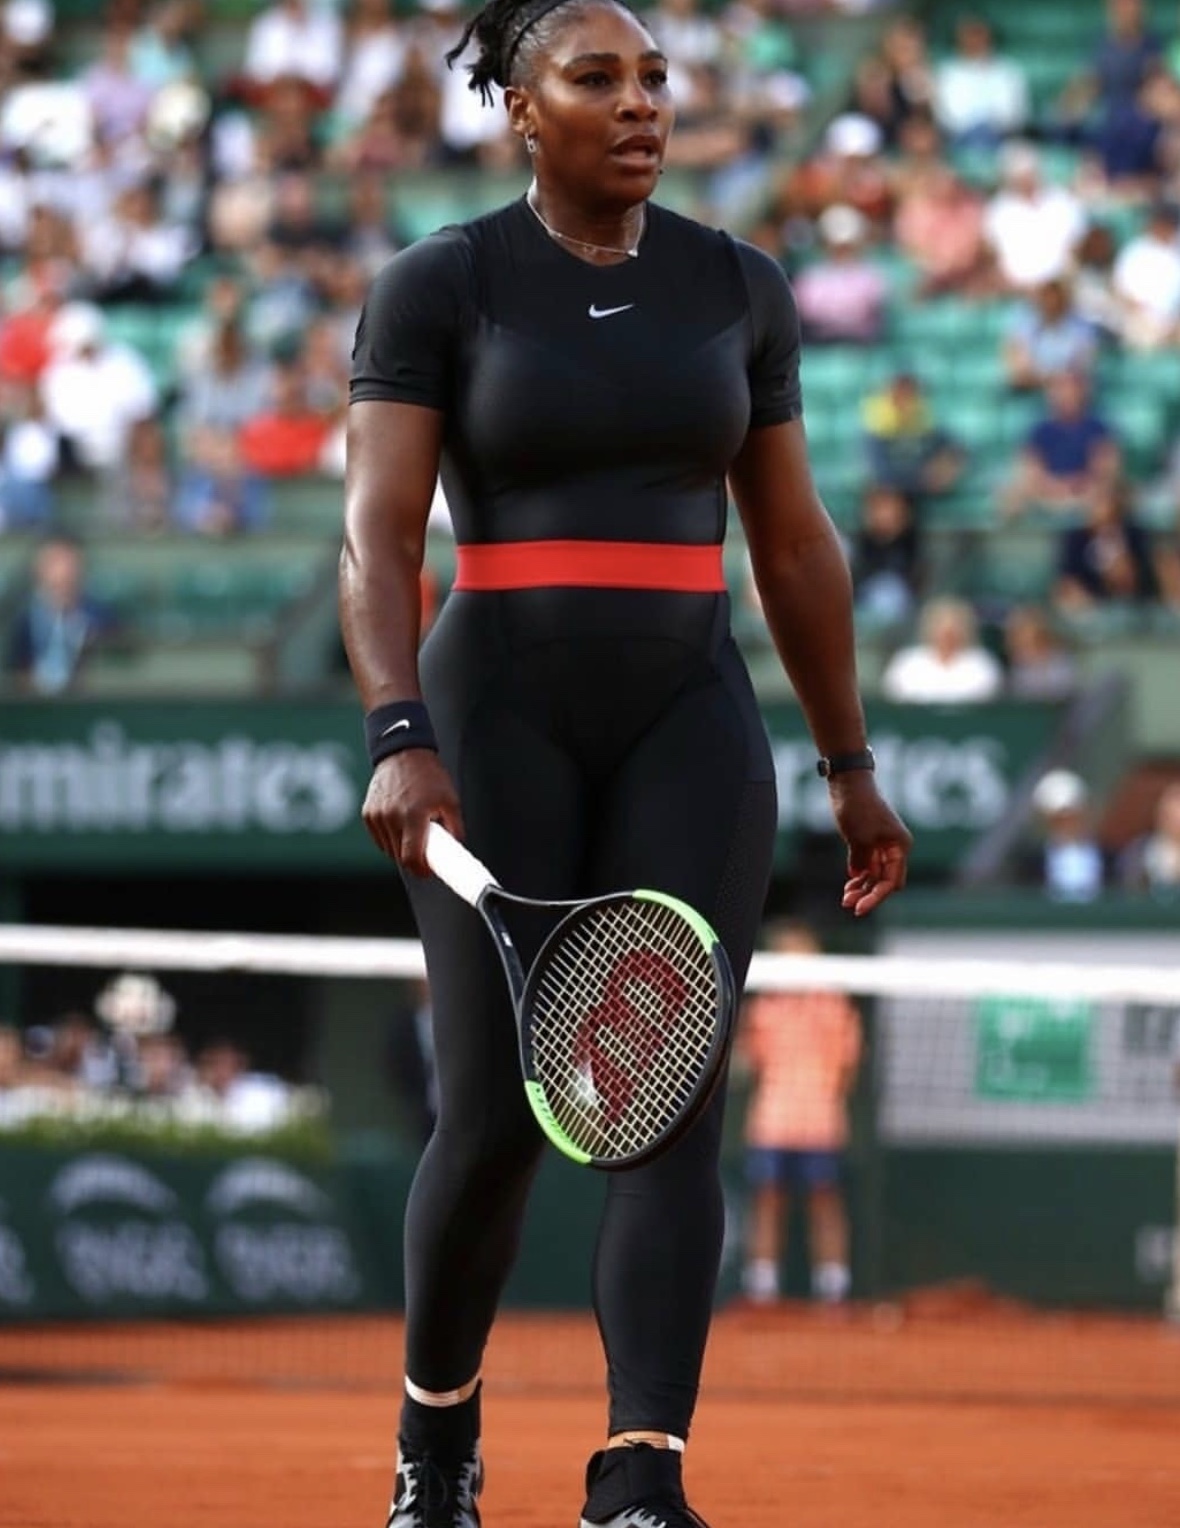 Serena Williams ‘s Black Catsuit Banned From The French Open Anne Whites White Catsuit In 1985 